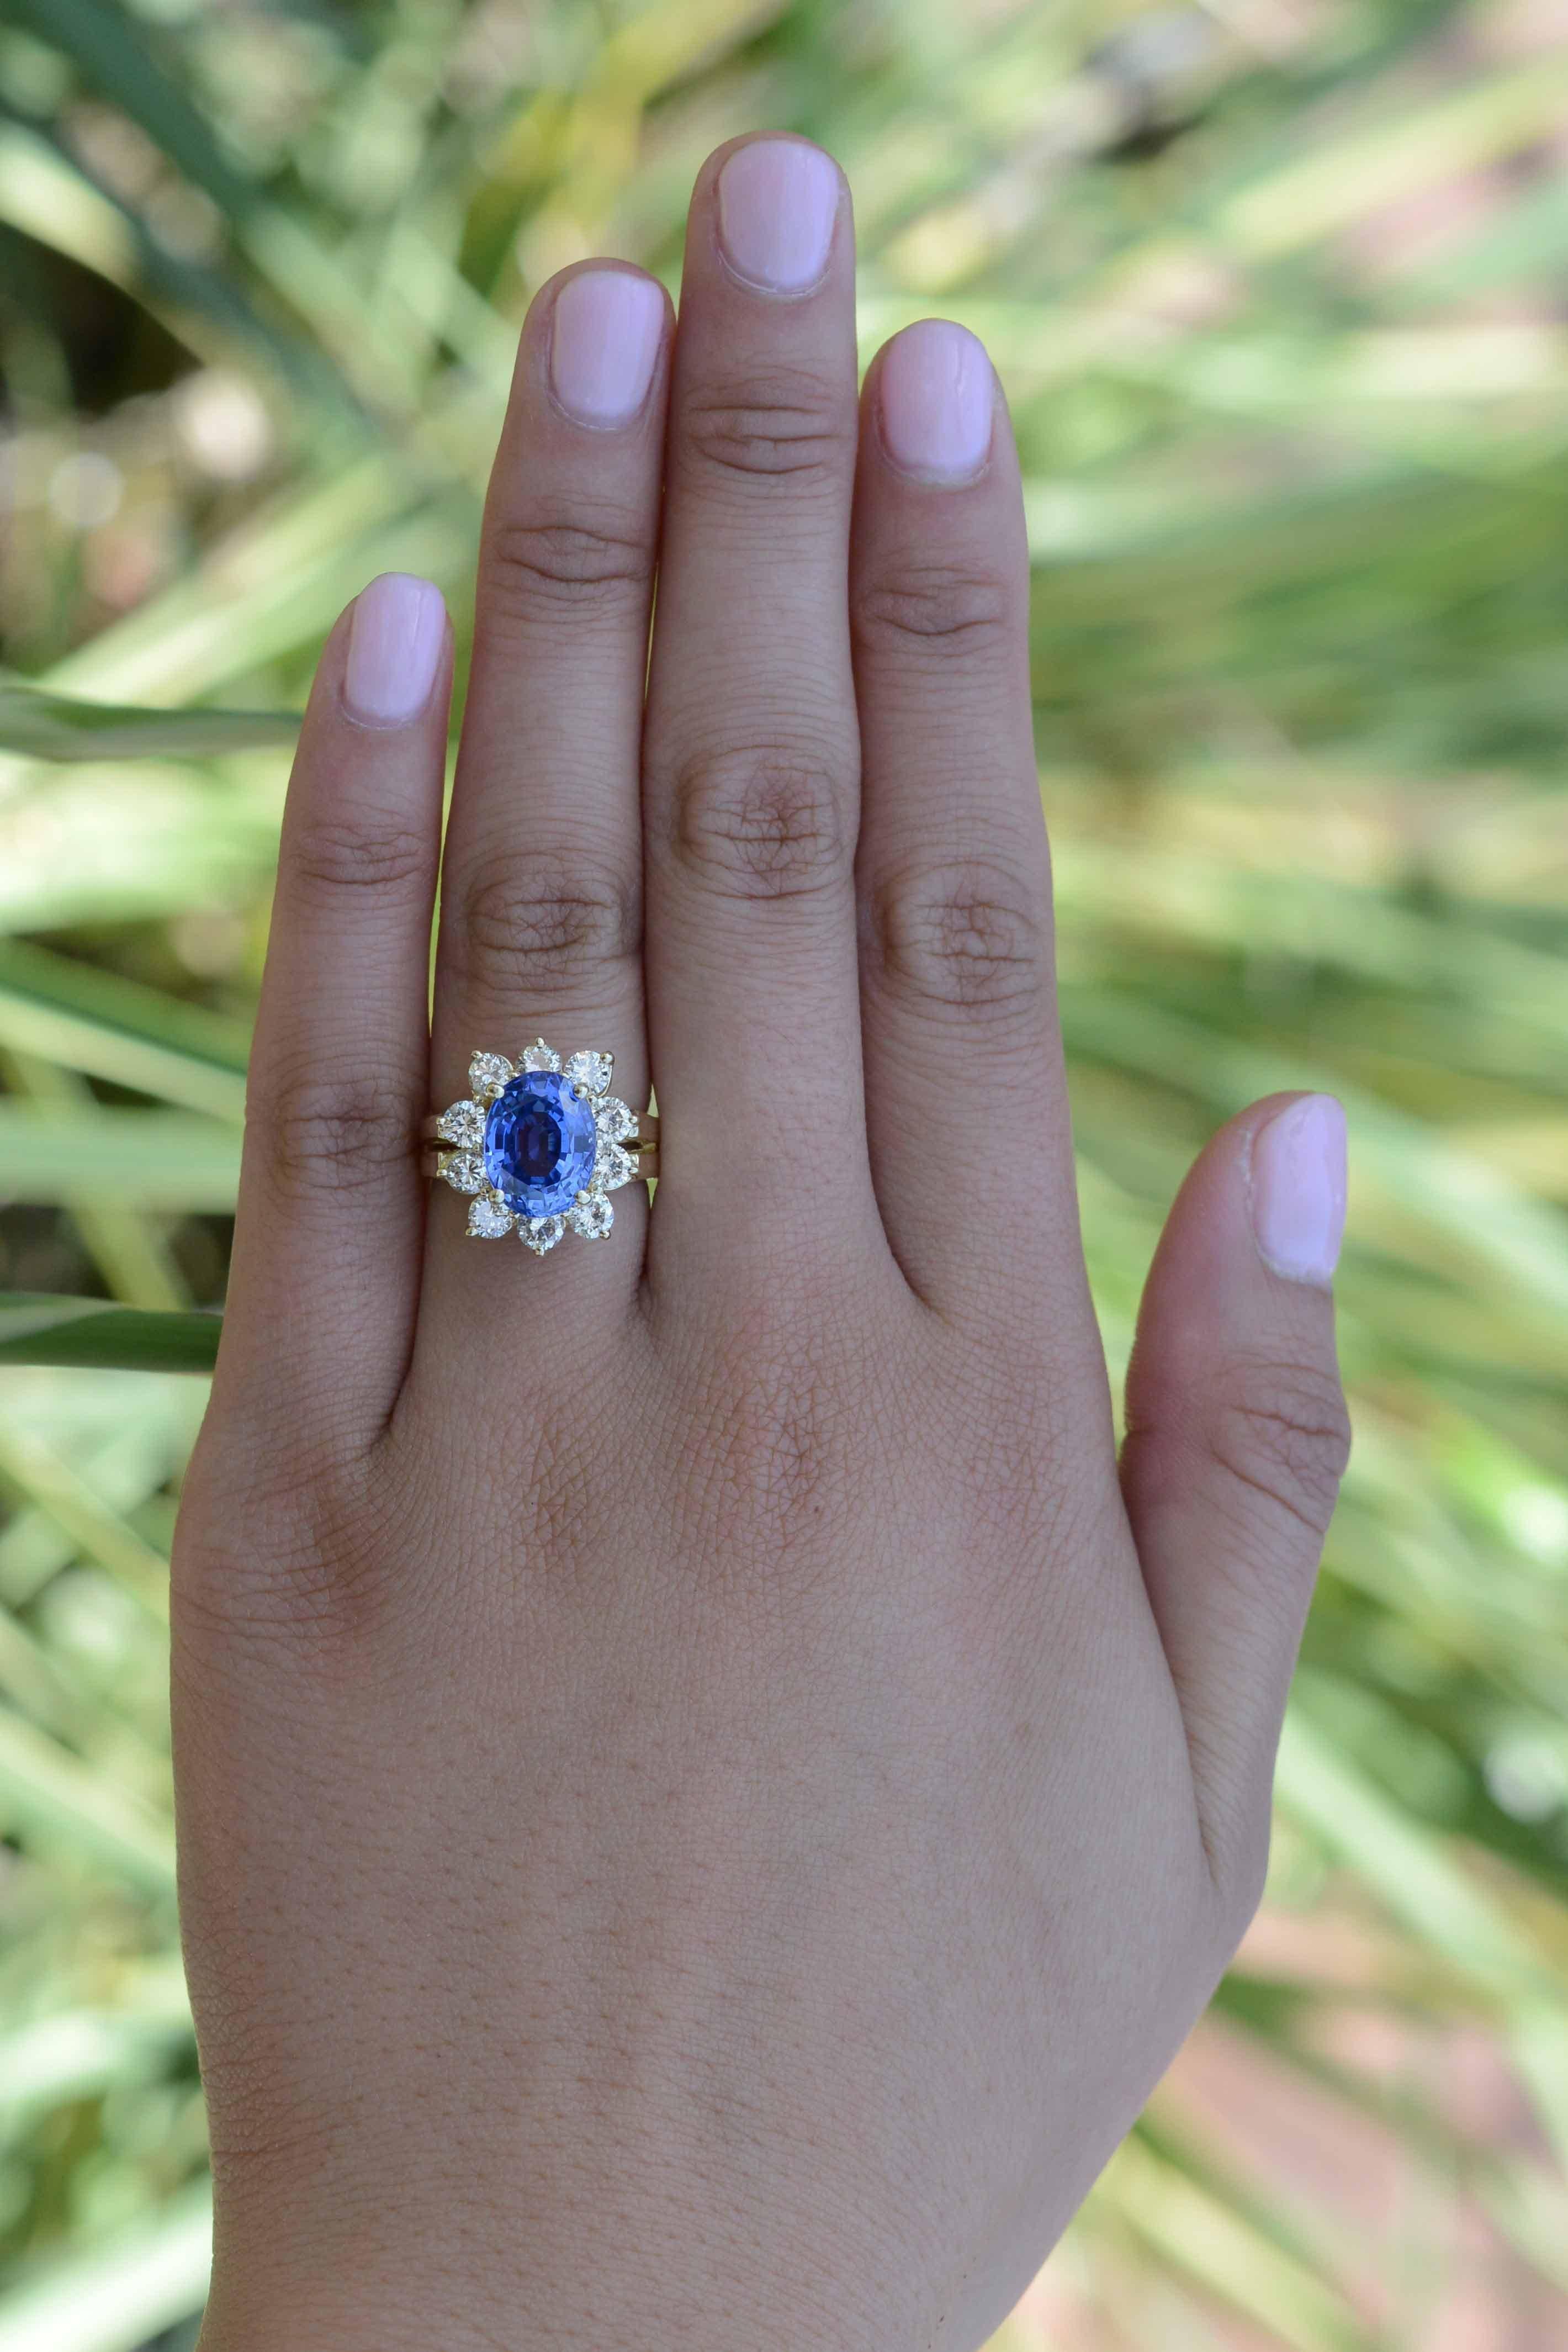 This GIA certified 4.64 carat sapphire and diamond ring is the ultimate symbol of everlasting love. The style reminiscent of the Princess Diana engagement ring showcases a velvety-blue, deeply saturated, sparkling Ceylon sapphire. Coupled with 1